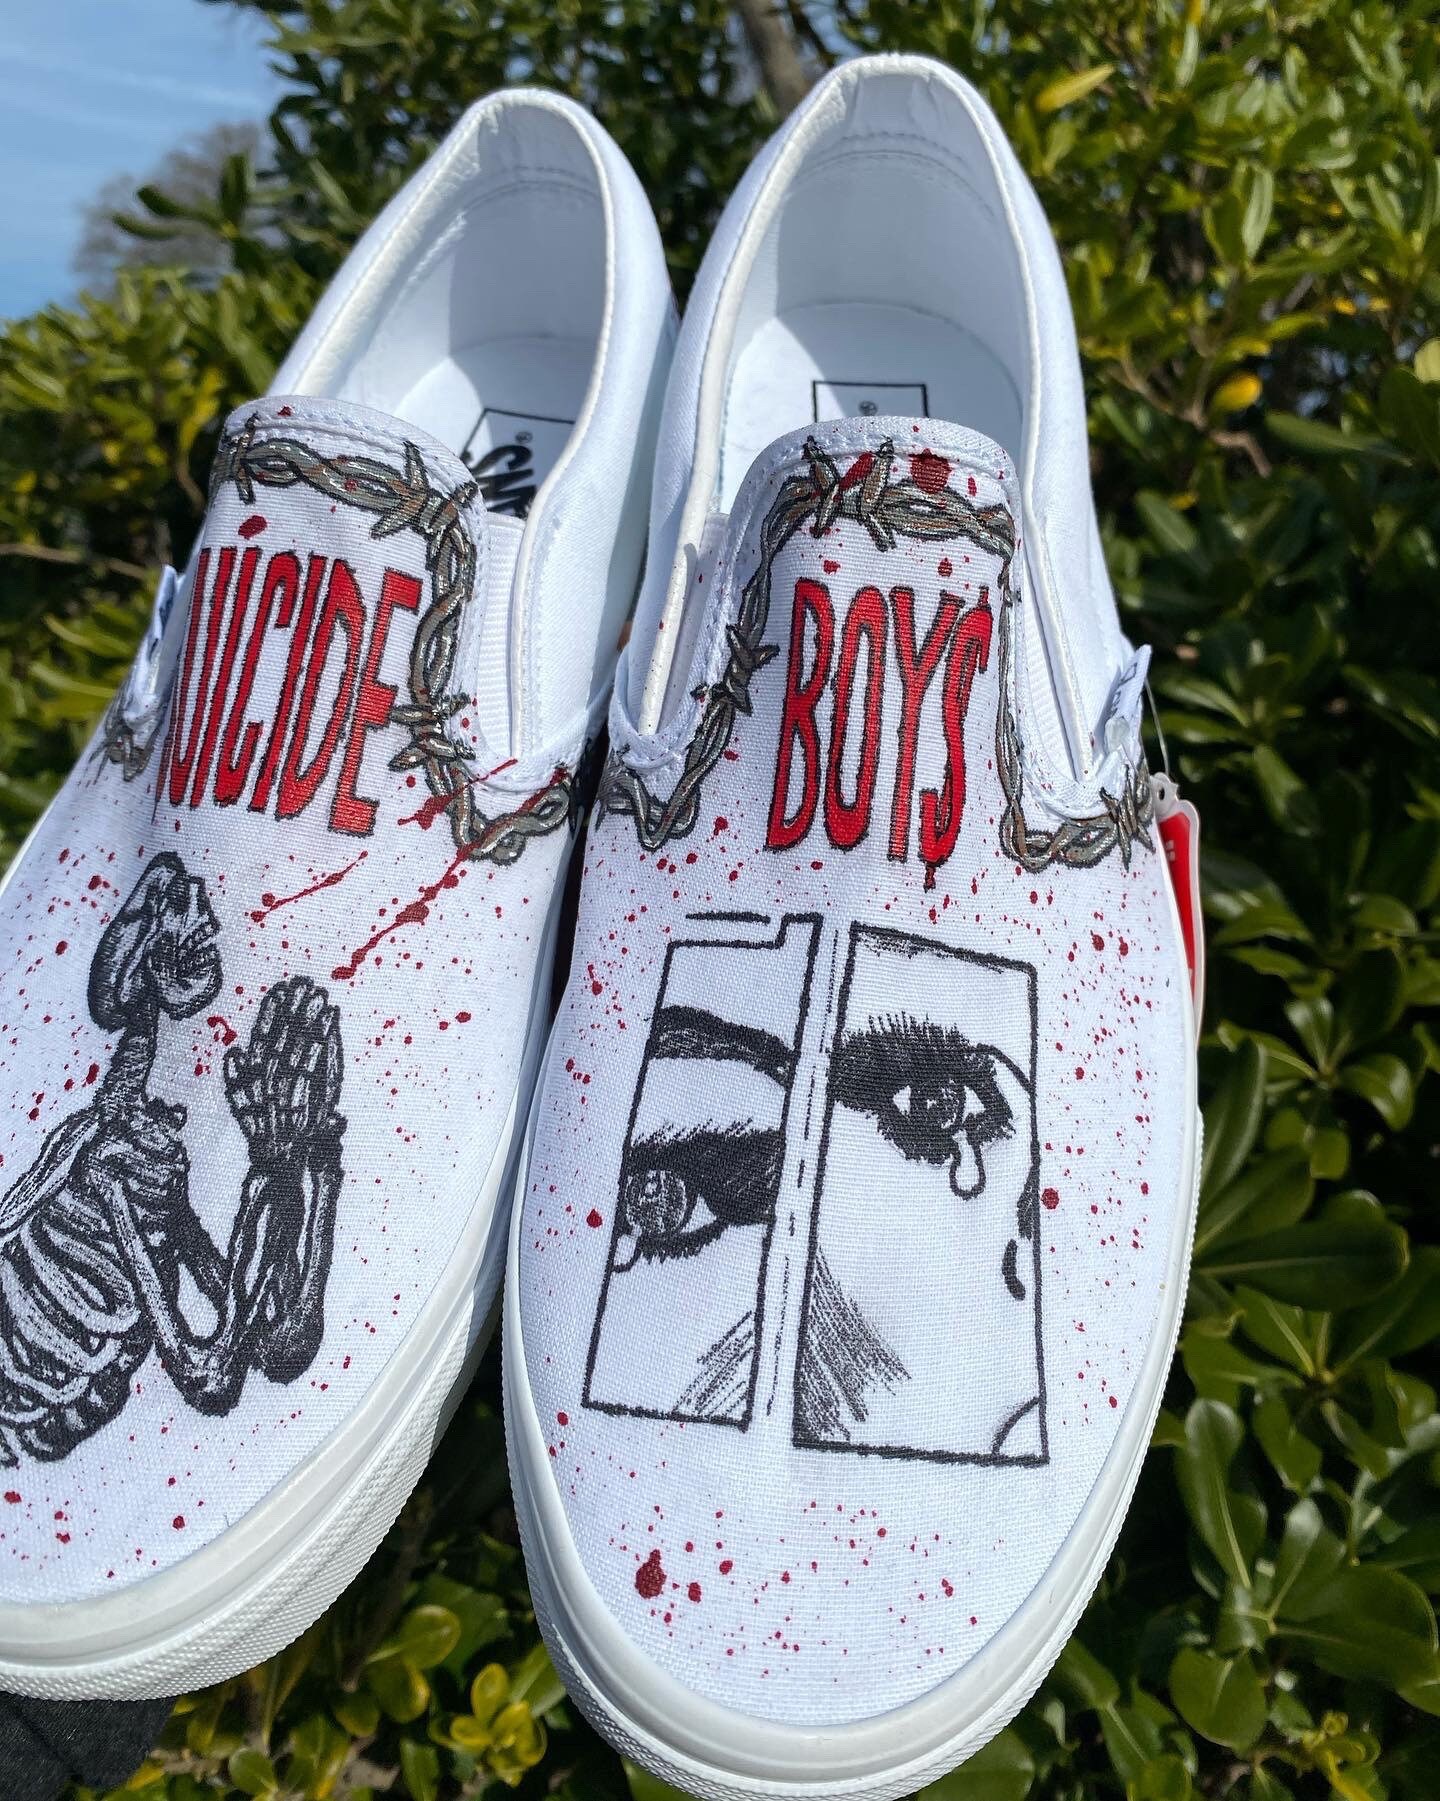 Thought I'd share my new custom Vans slip ons that my friend painted for  me! We designed it together off of the Exogenesis album art off of The  Resistance :) Her business